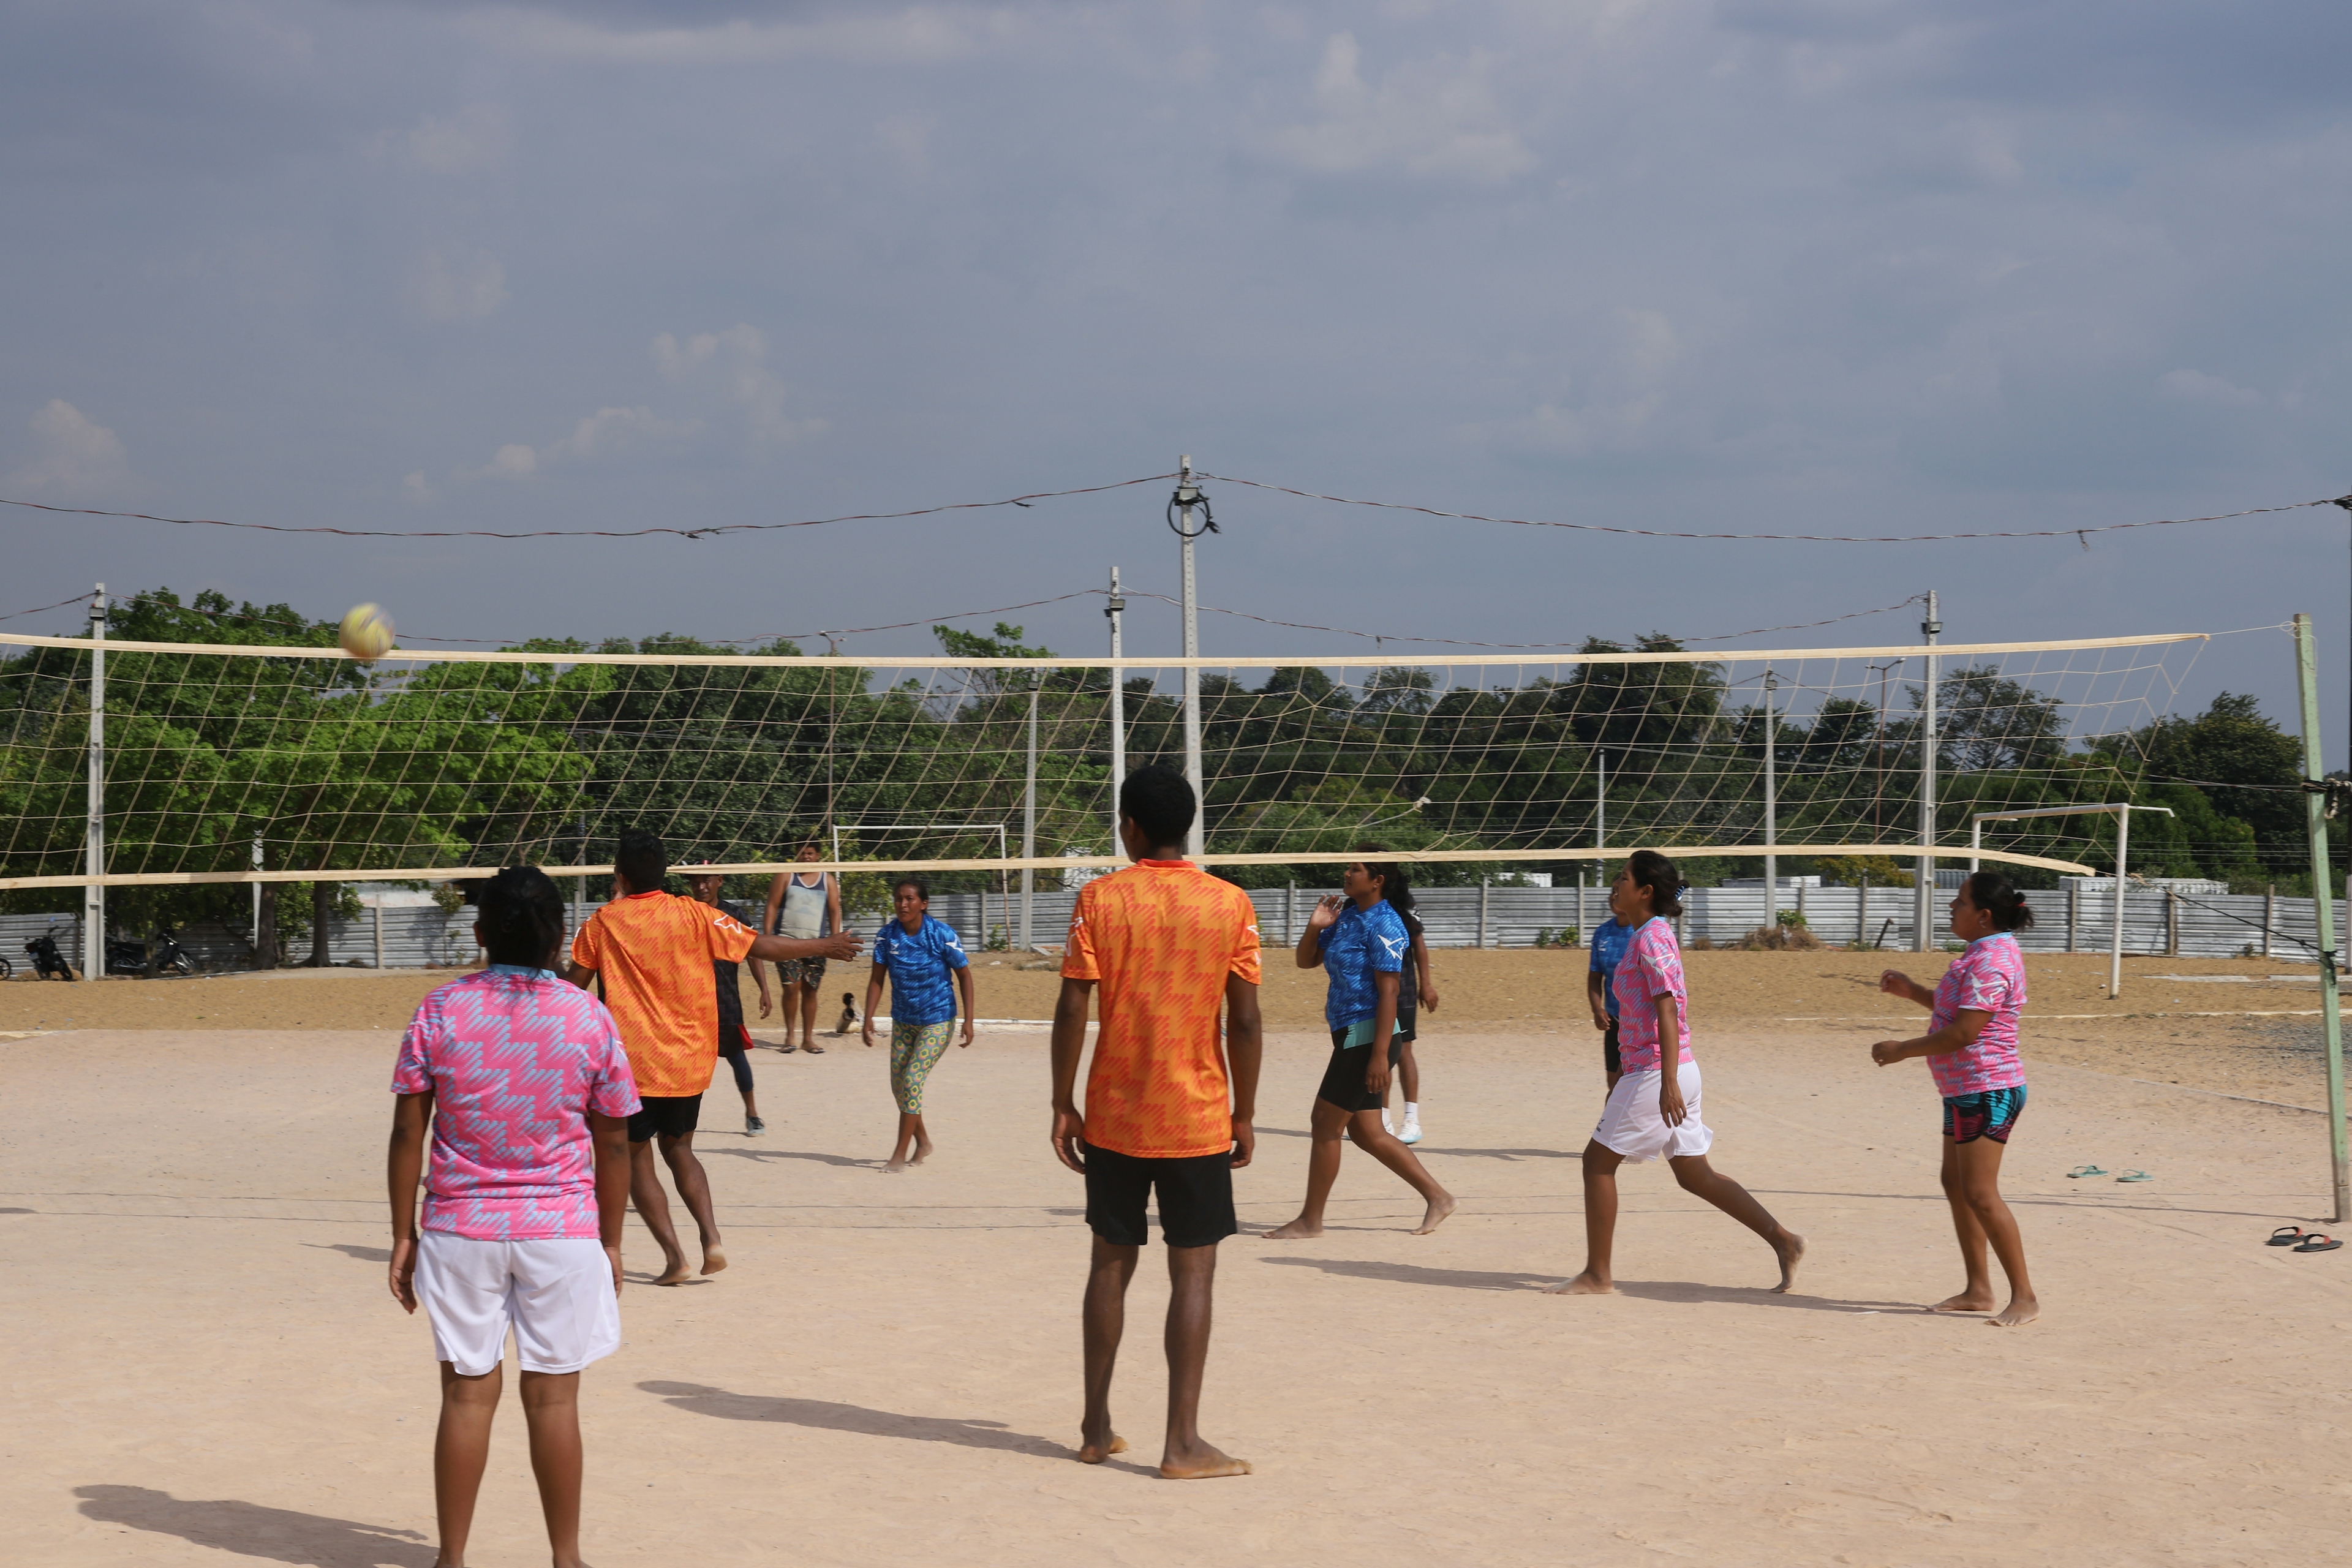 Game of volleyball in Boa Vista shelter